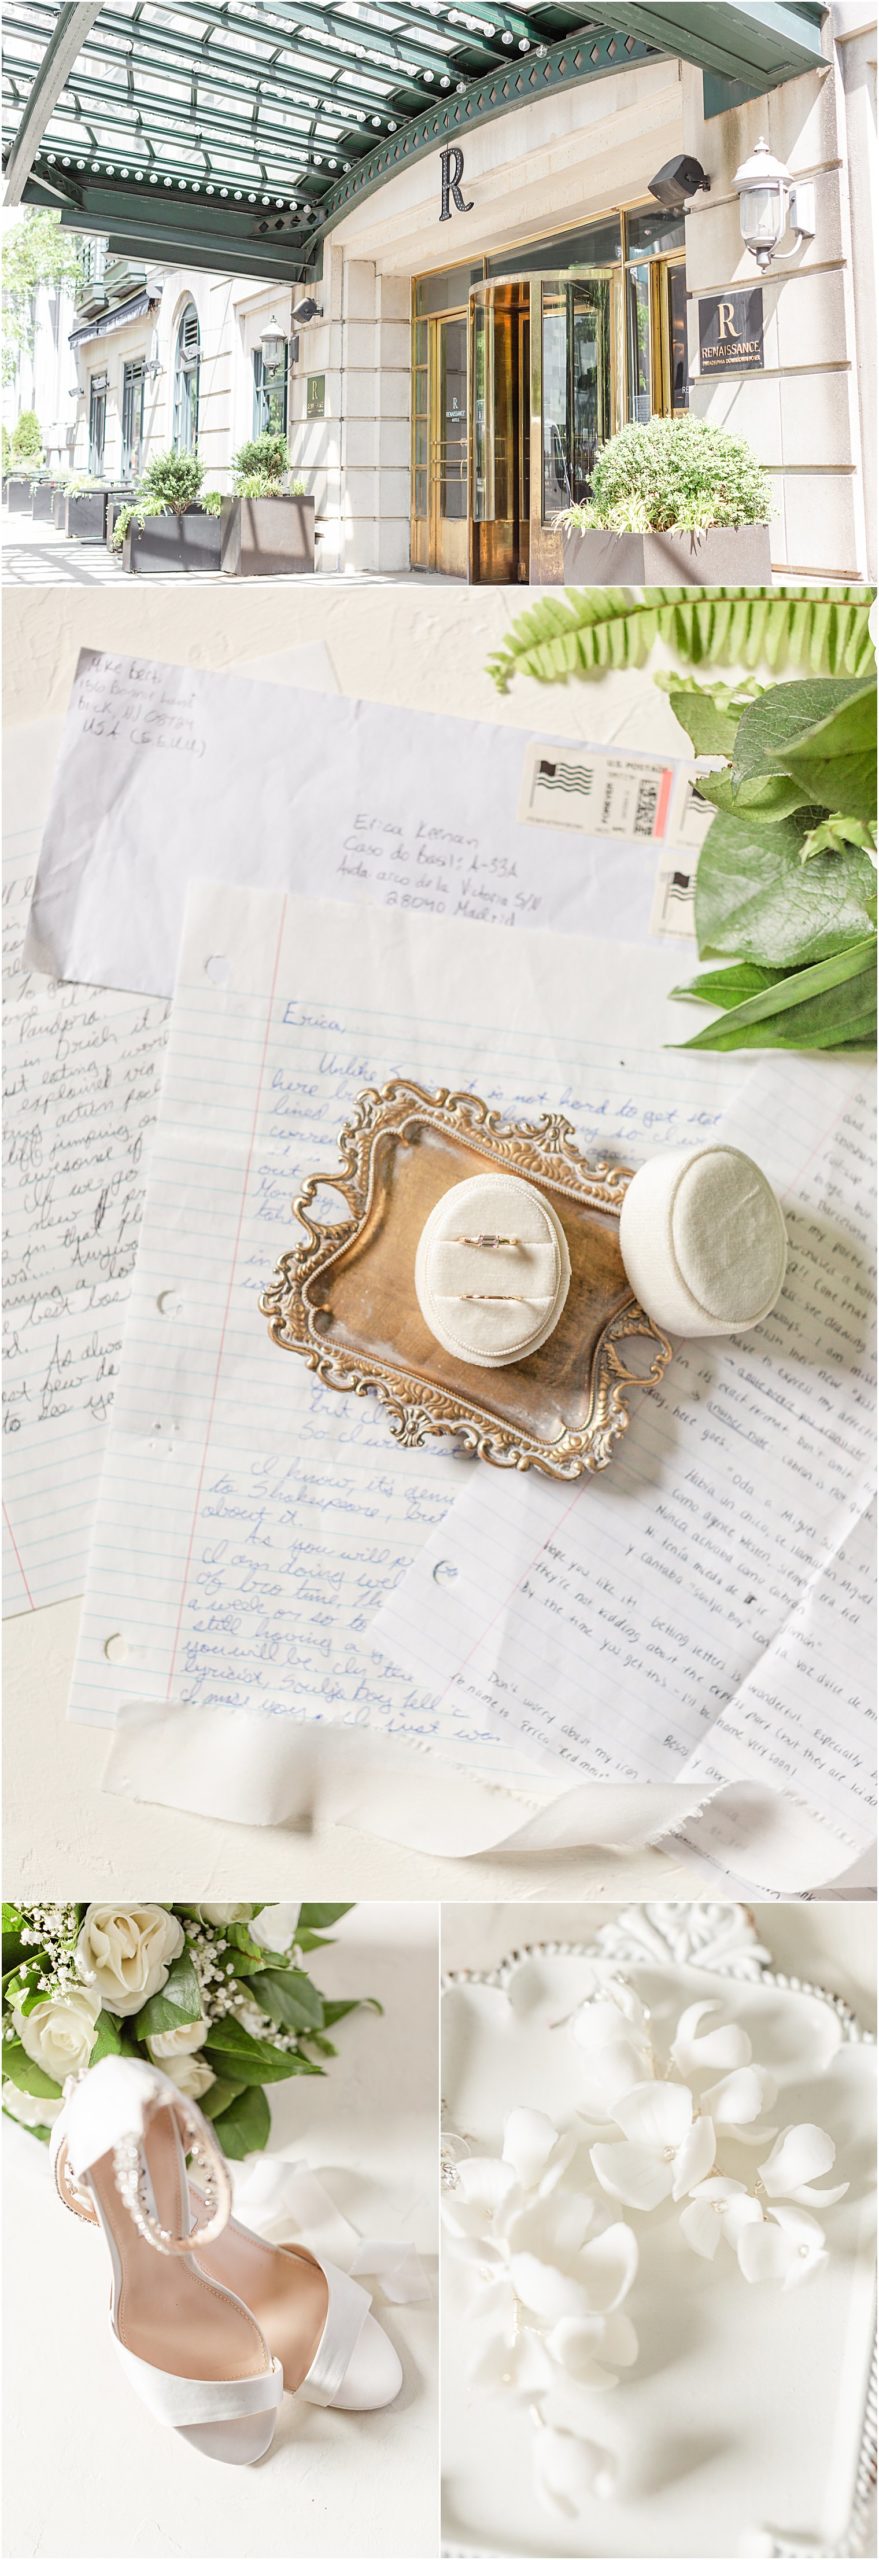 The wedding details including wedding ring and bride and groom love letters